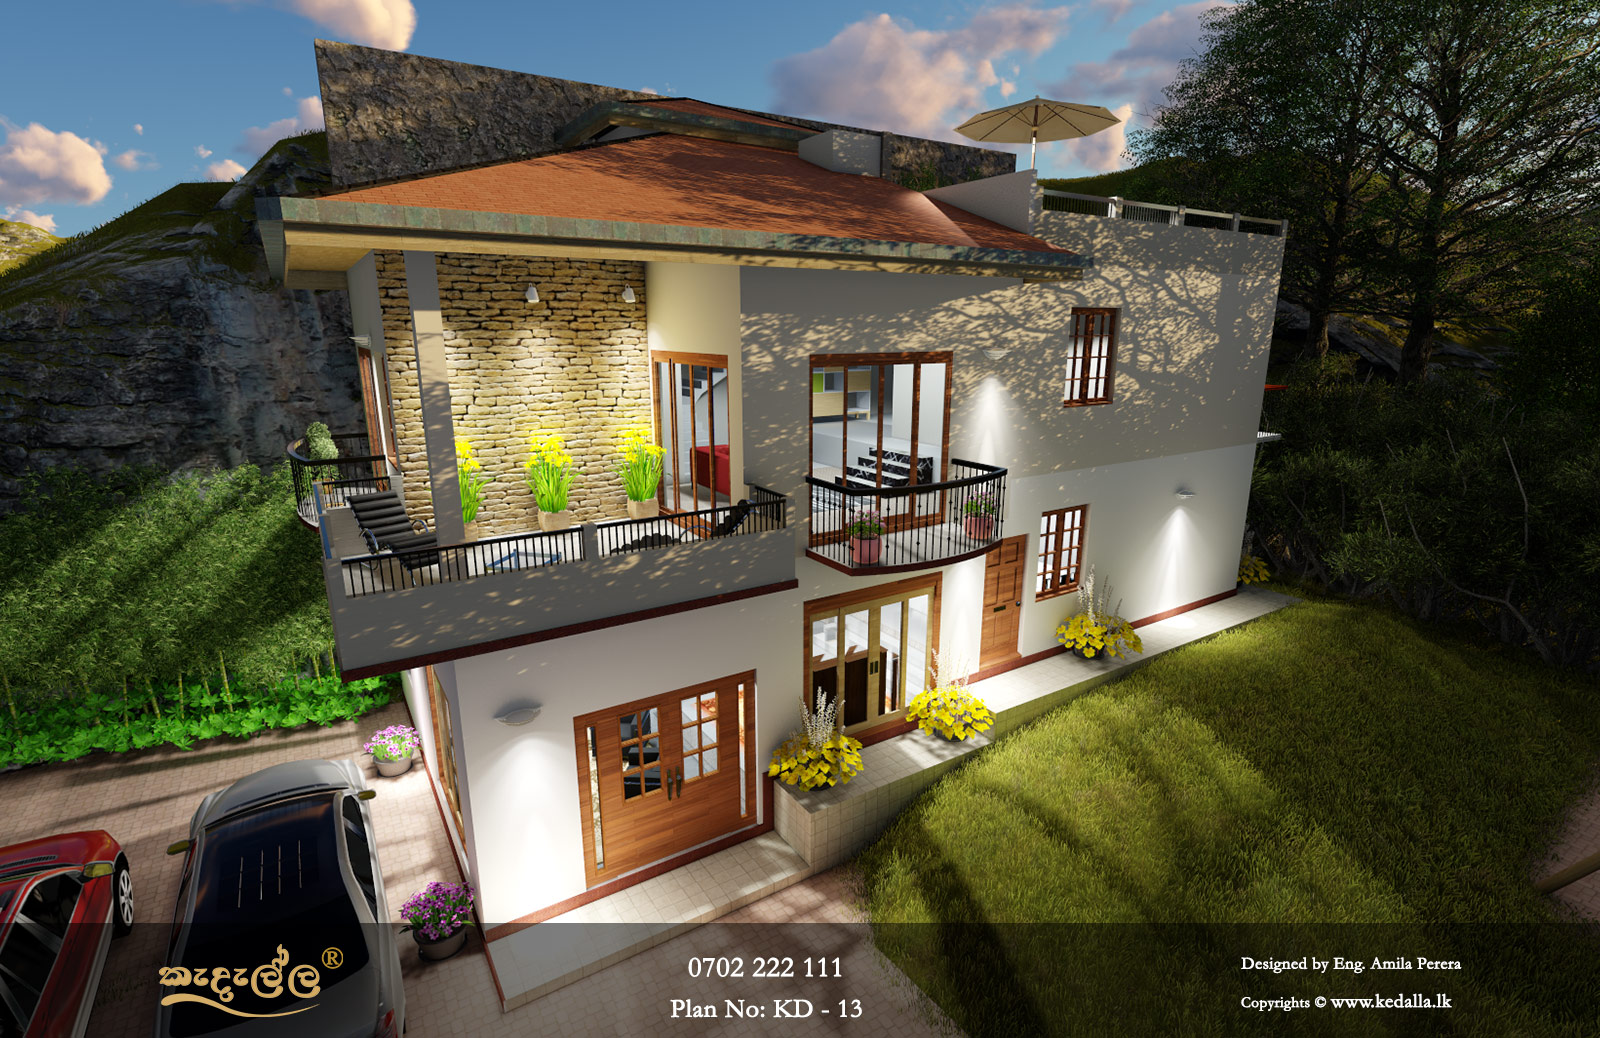 A gorgeous house design for sloping land in sri lanka. Unlike designing on a level site, the first consideration for a house plan on a sloping site is to develop cross sections through the site which shows the slope of the land